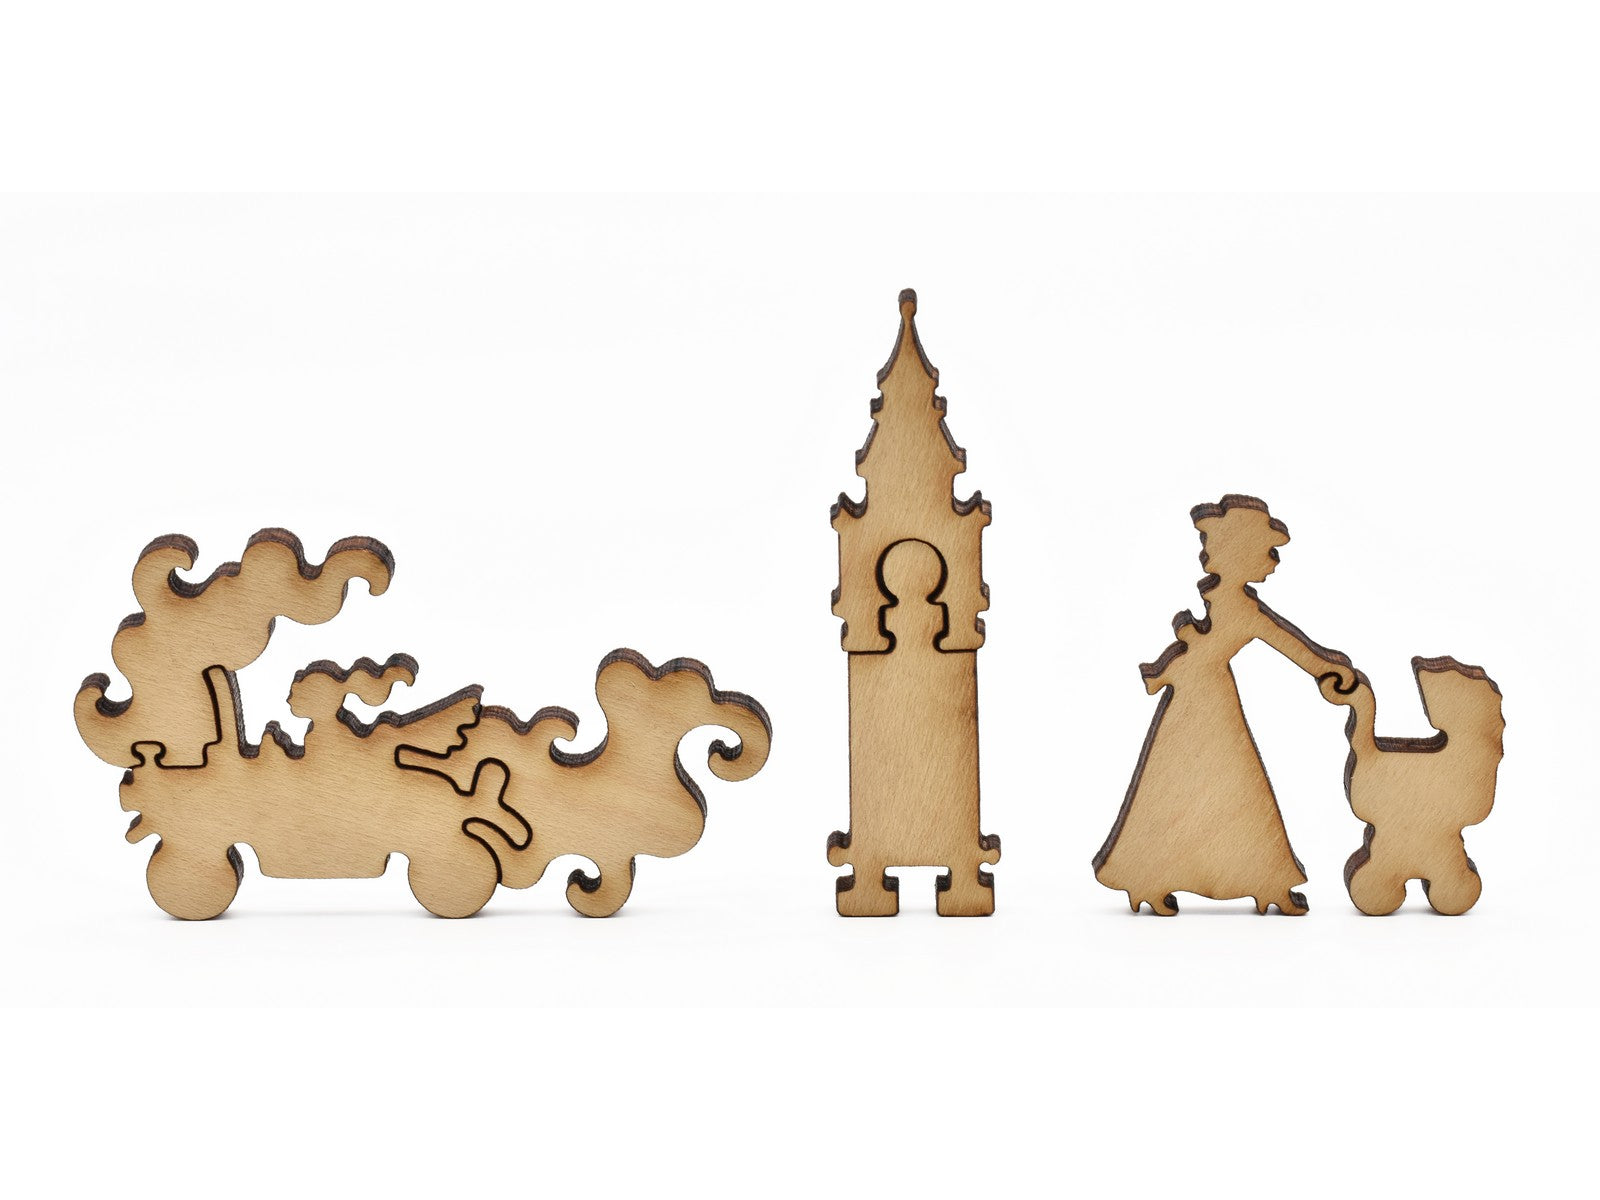 A closeup of pieces in the shape of a car, a clocktower, and a person pushing a stroller.